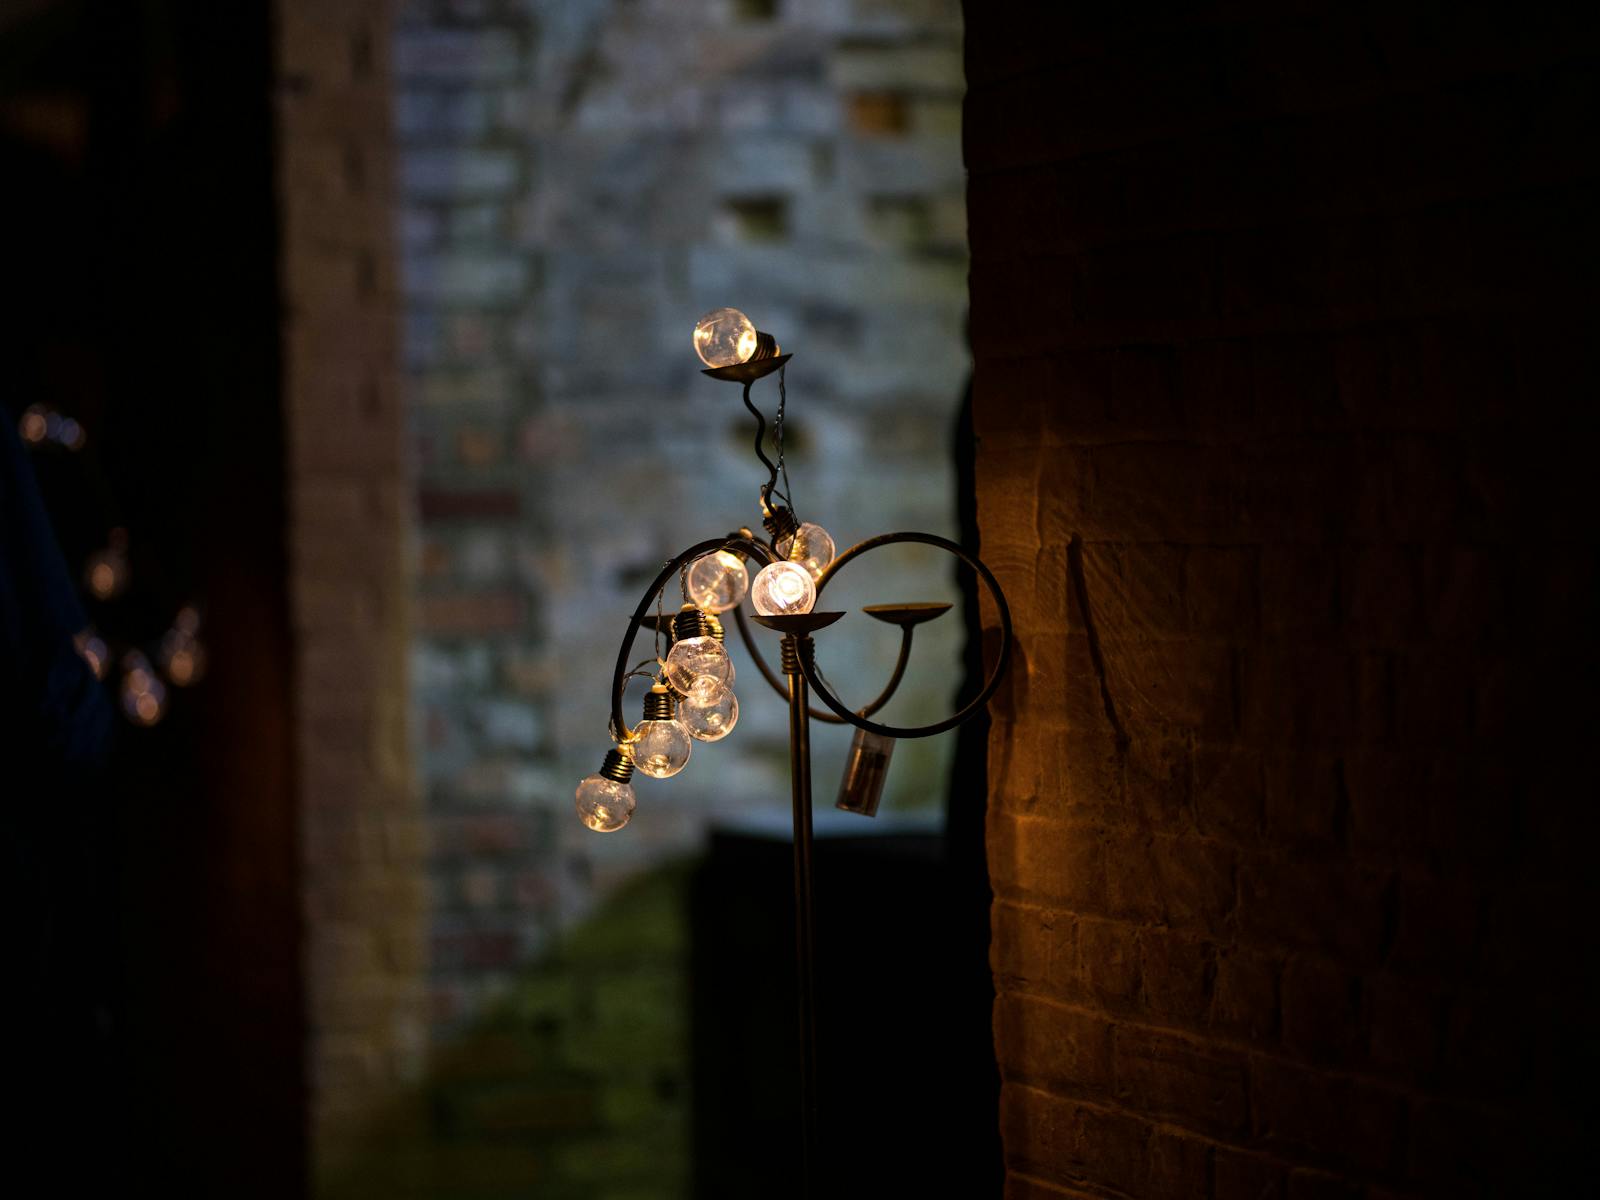 A 19th century style lamp hanging on the sandstone wall